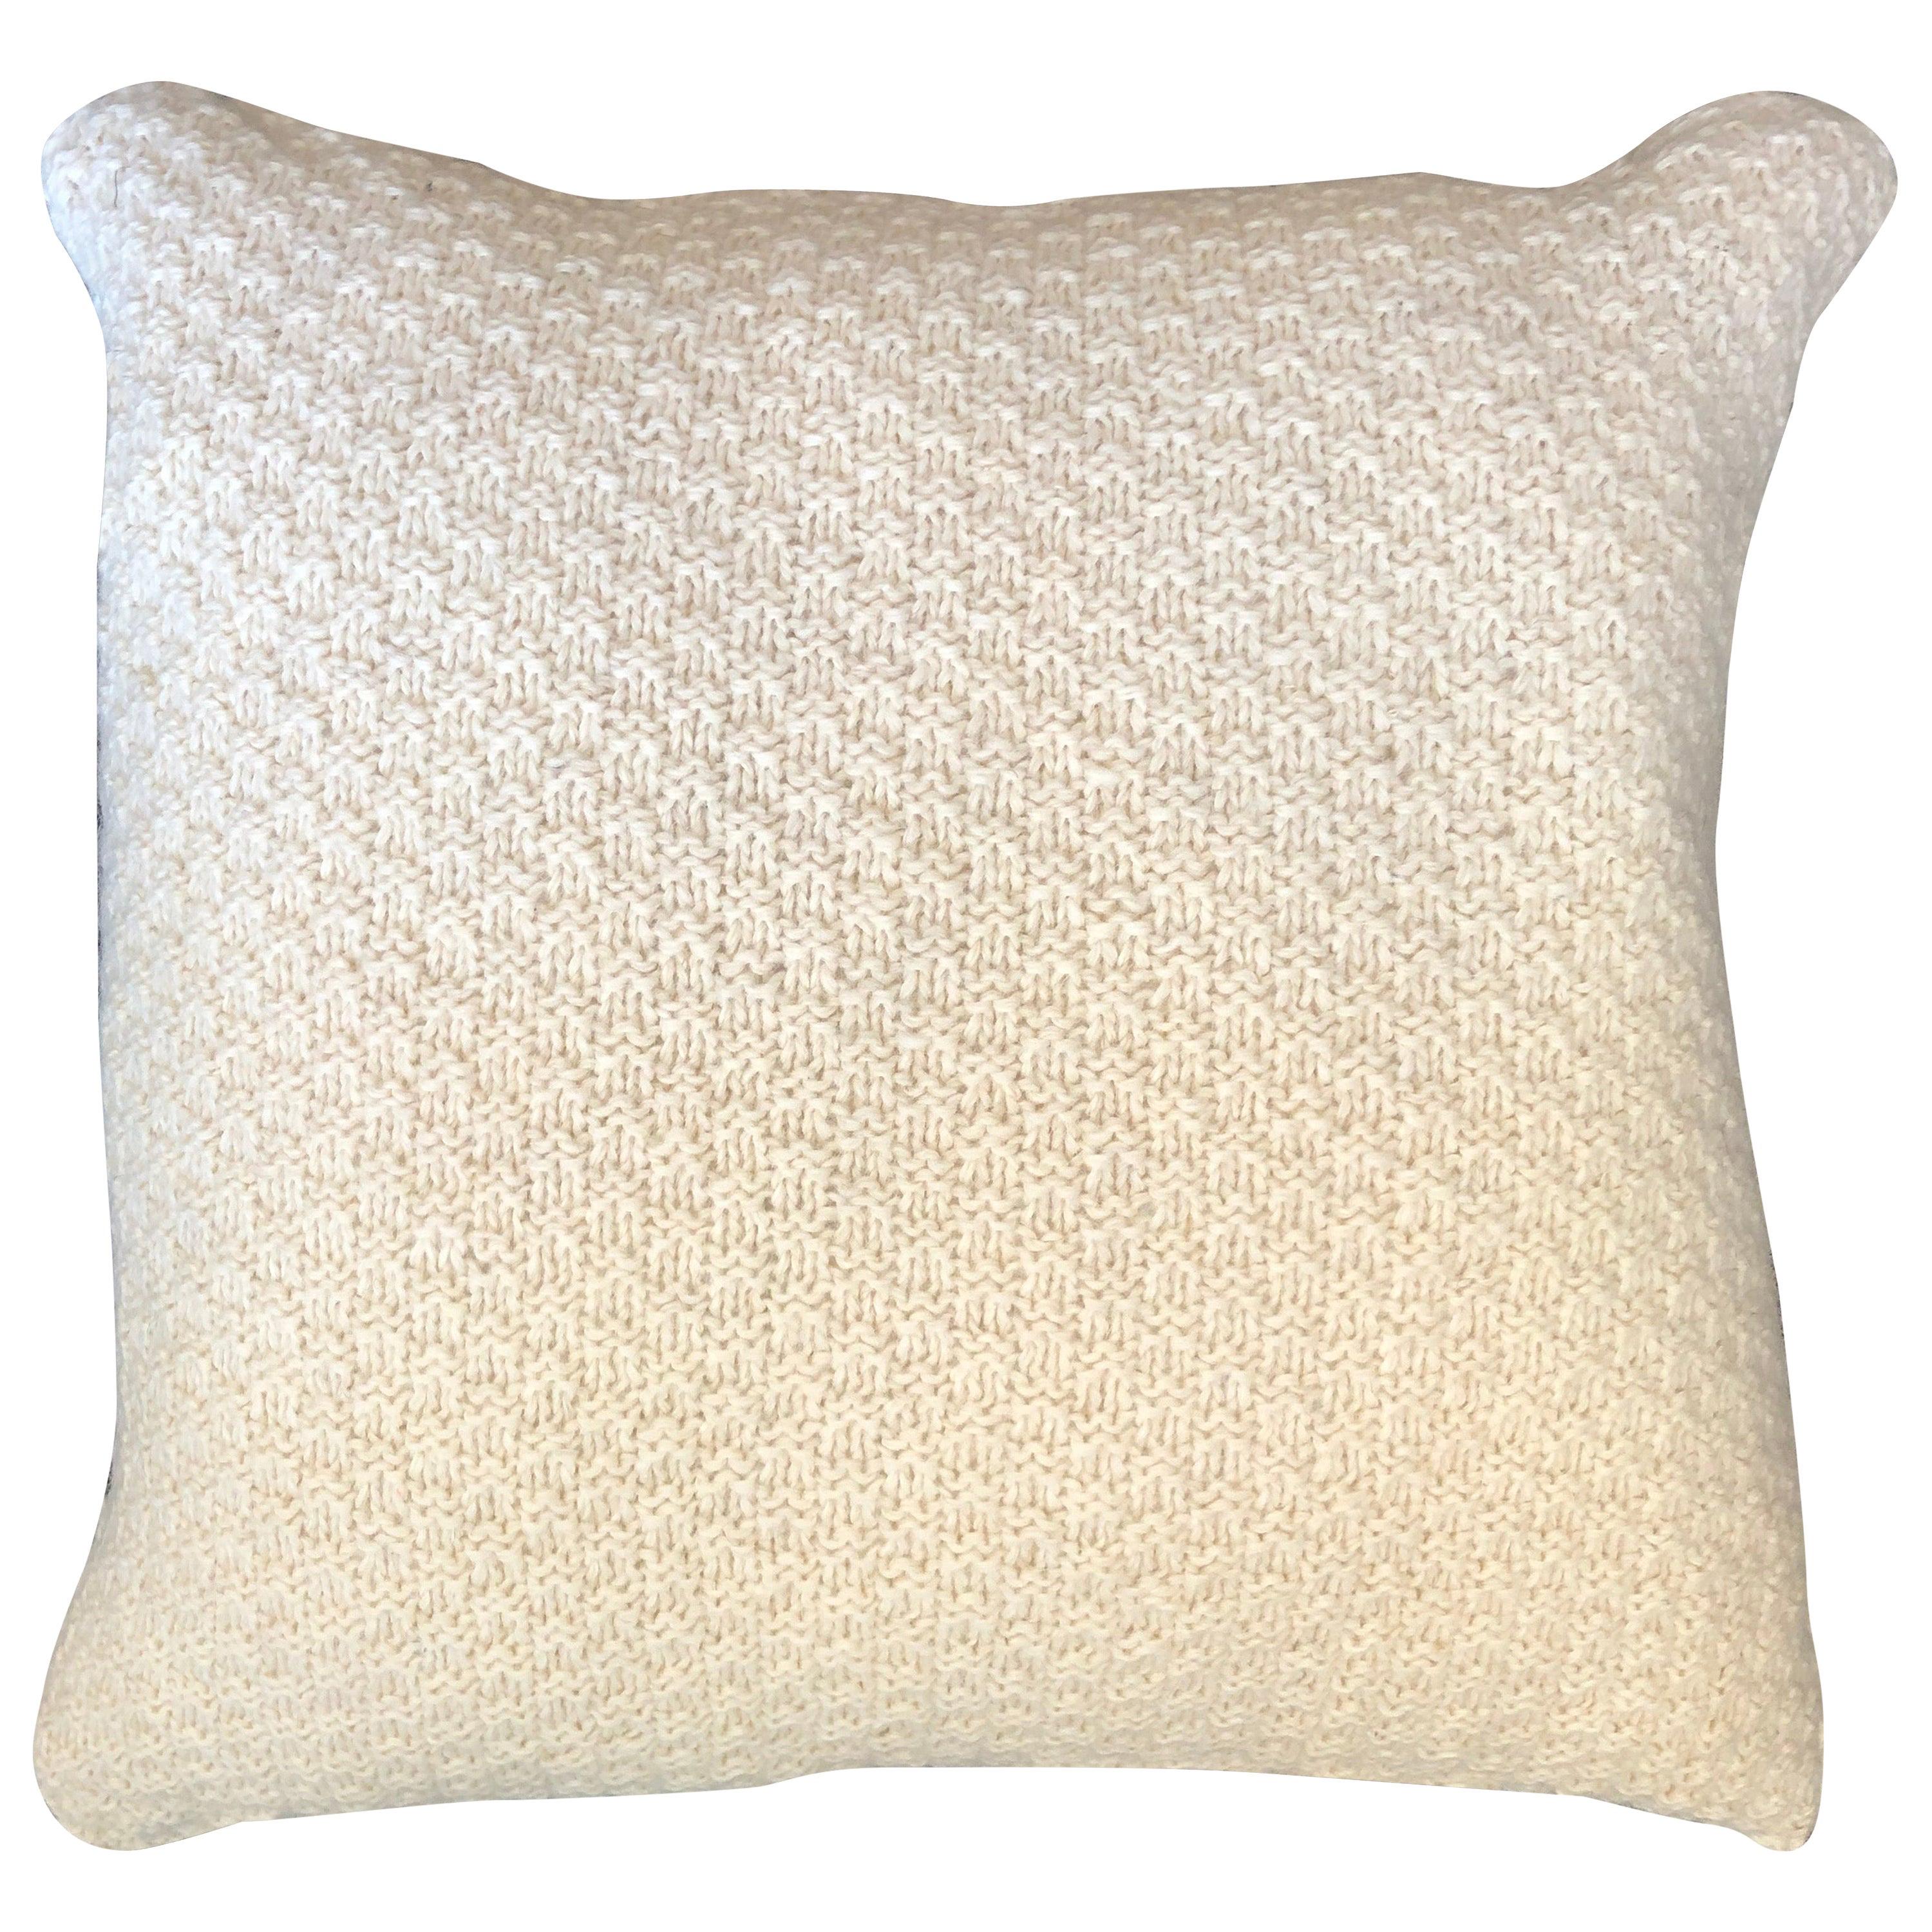 "Ostia" Handmade Wool Off-White Pillow by Le Lampade